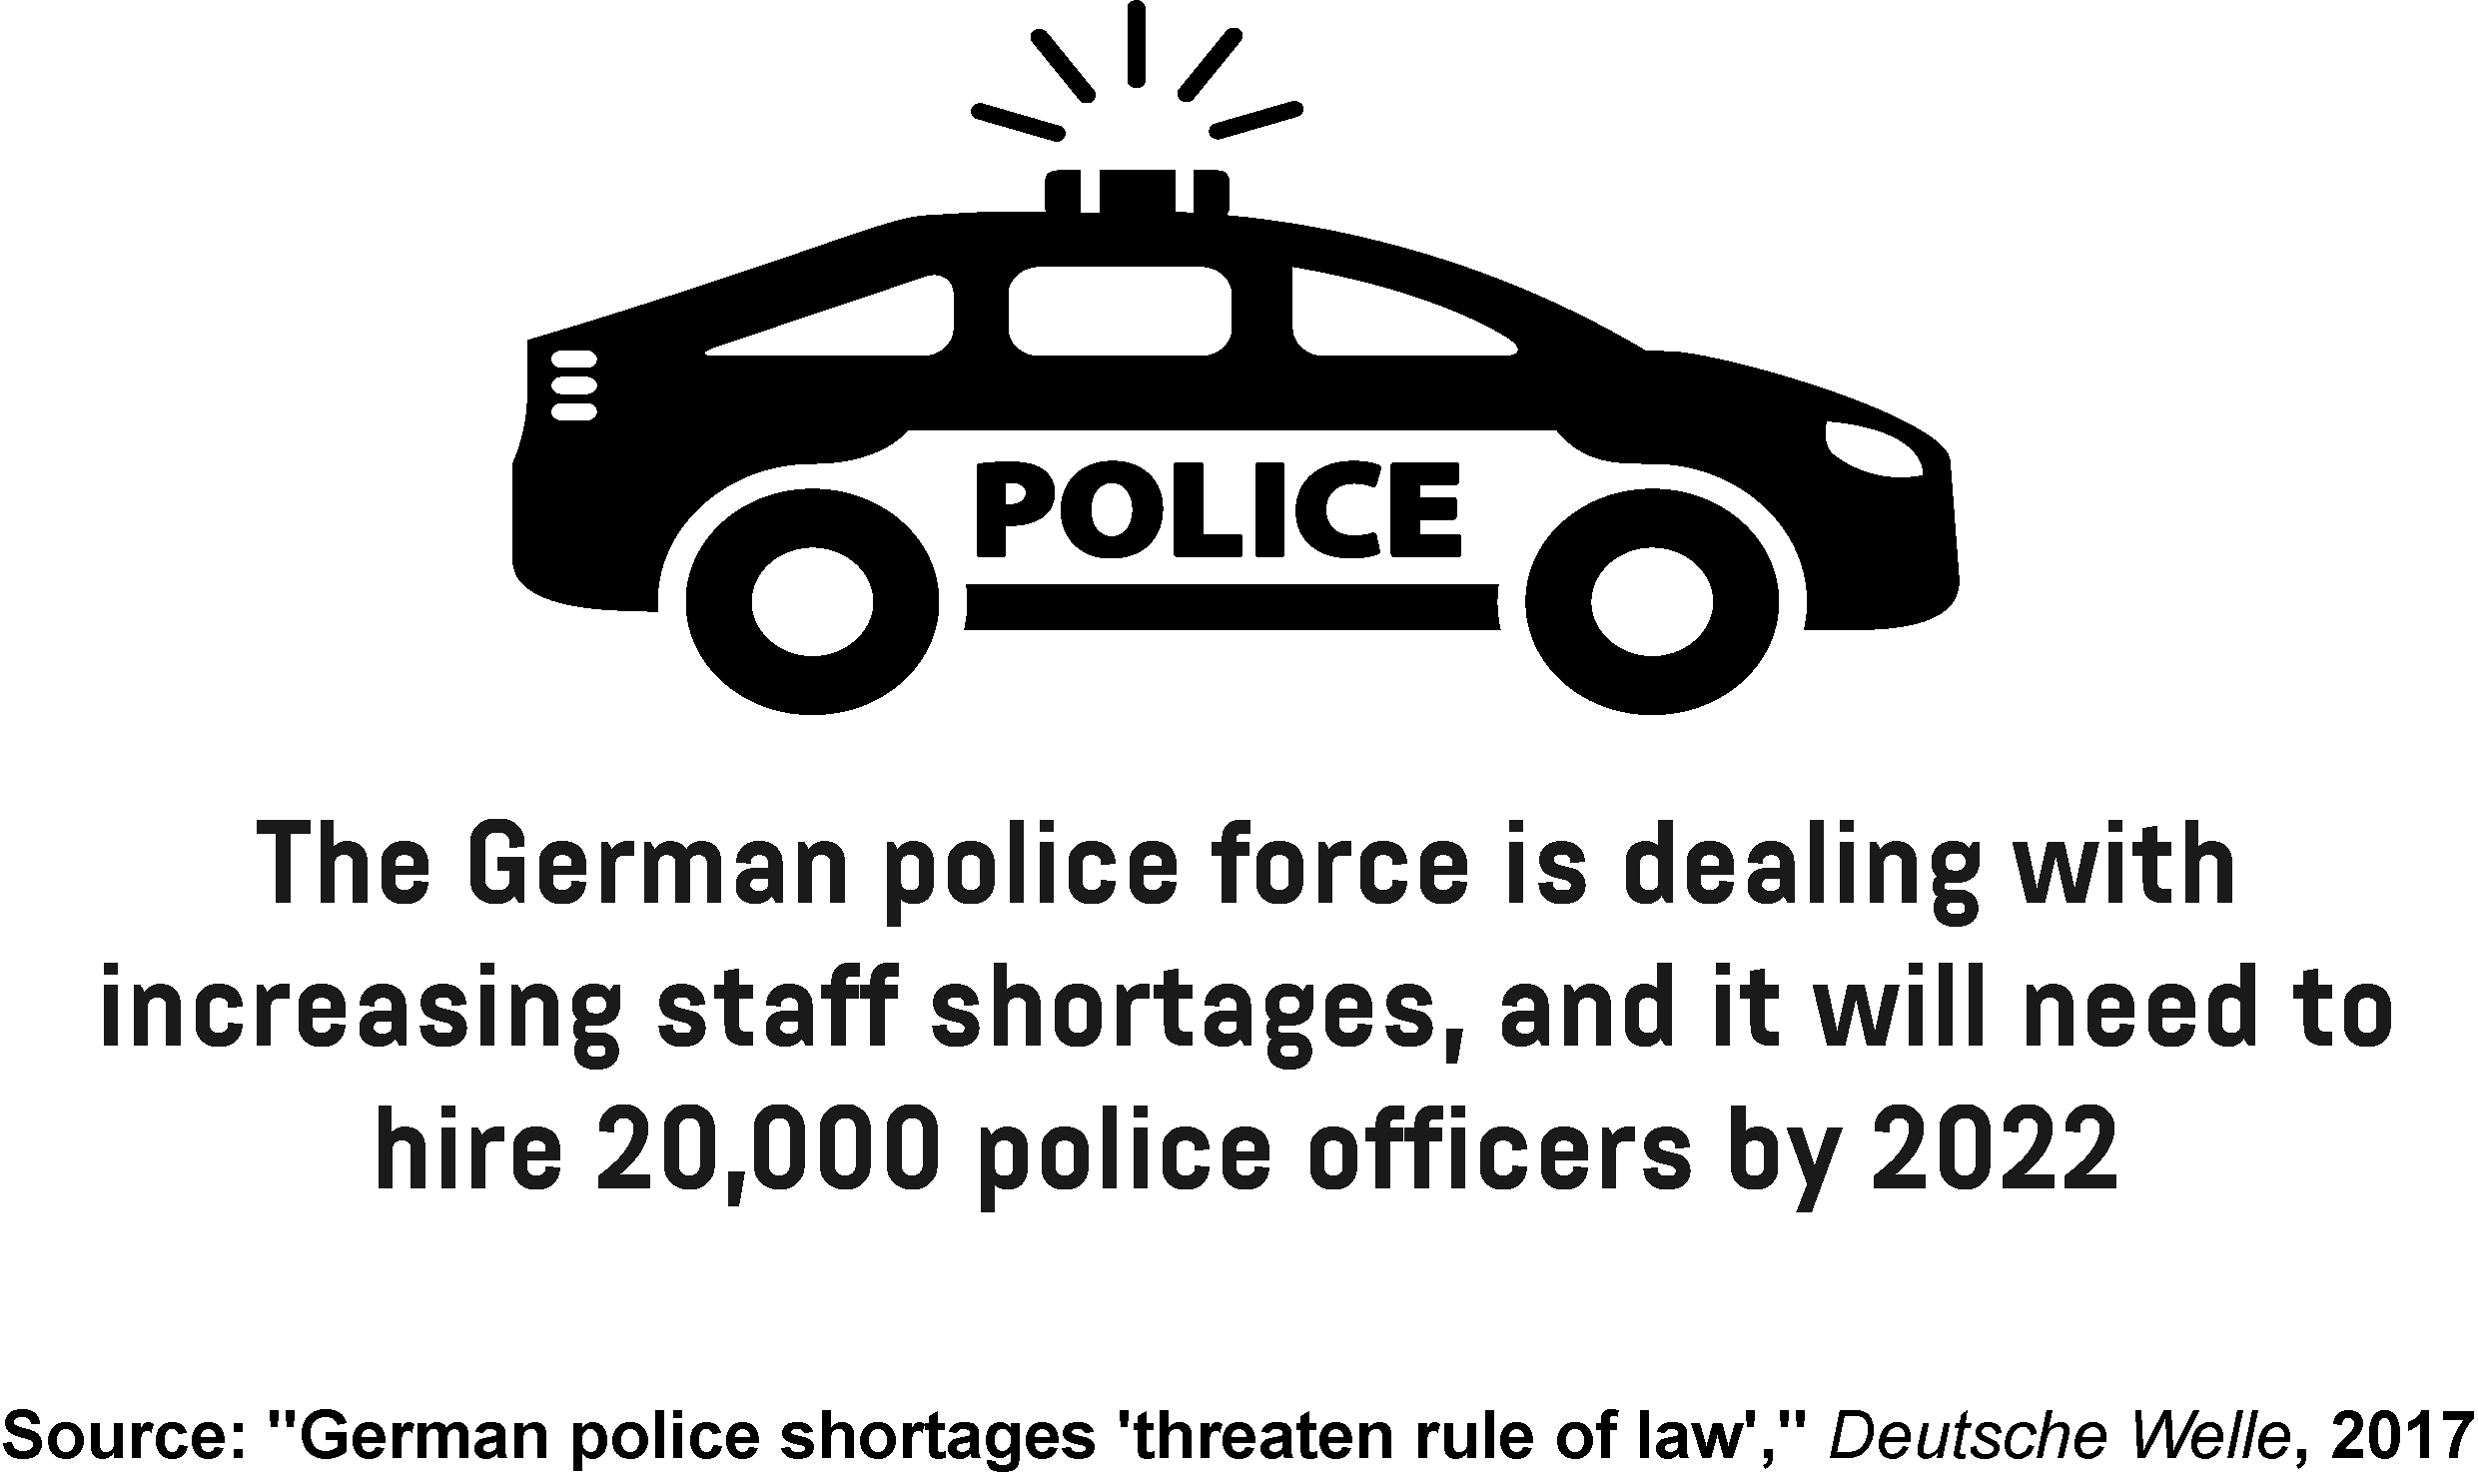 Infographic showing how many police officers Germany will need to hire by 2022.